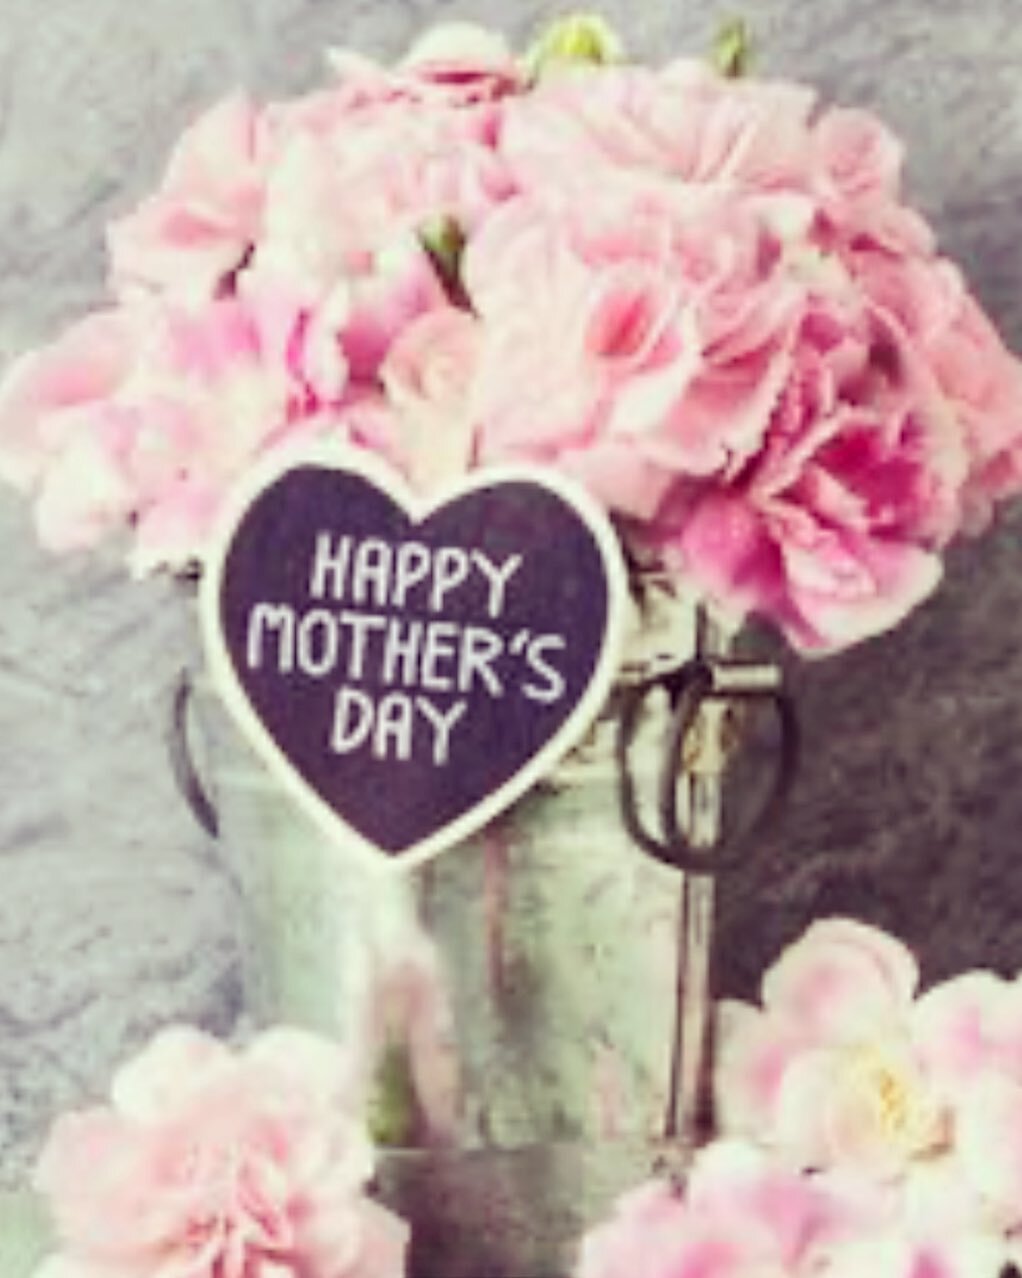 Happy Mother&rsquo;s Day to all you beautiful Mamas!! Enjoy the day celebrating YOU!!💕
#momlife #mom #mothersday #georgetownsc❤️ #discovergeorgetownsc #shoplocal